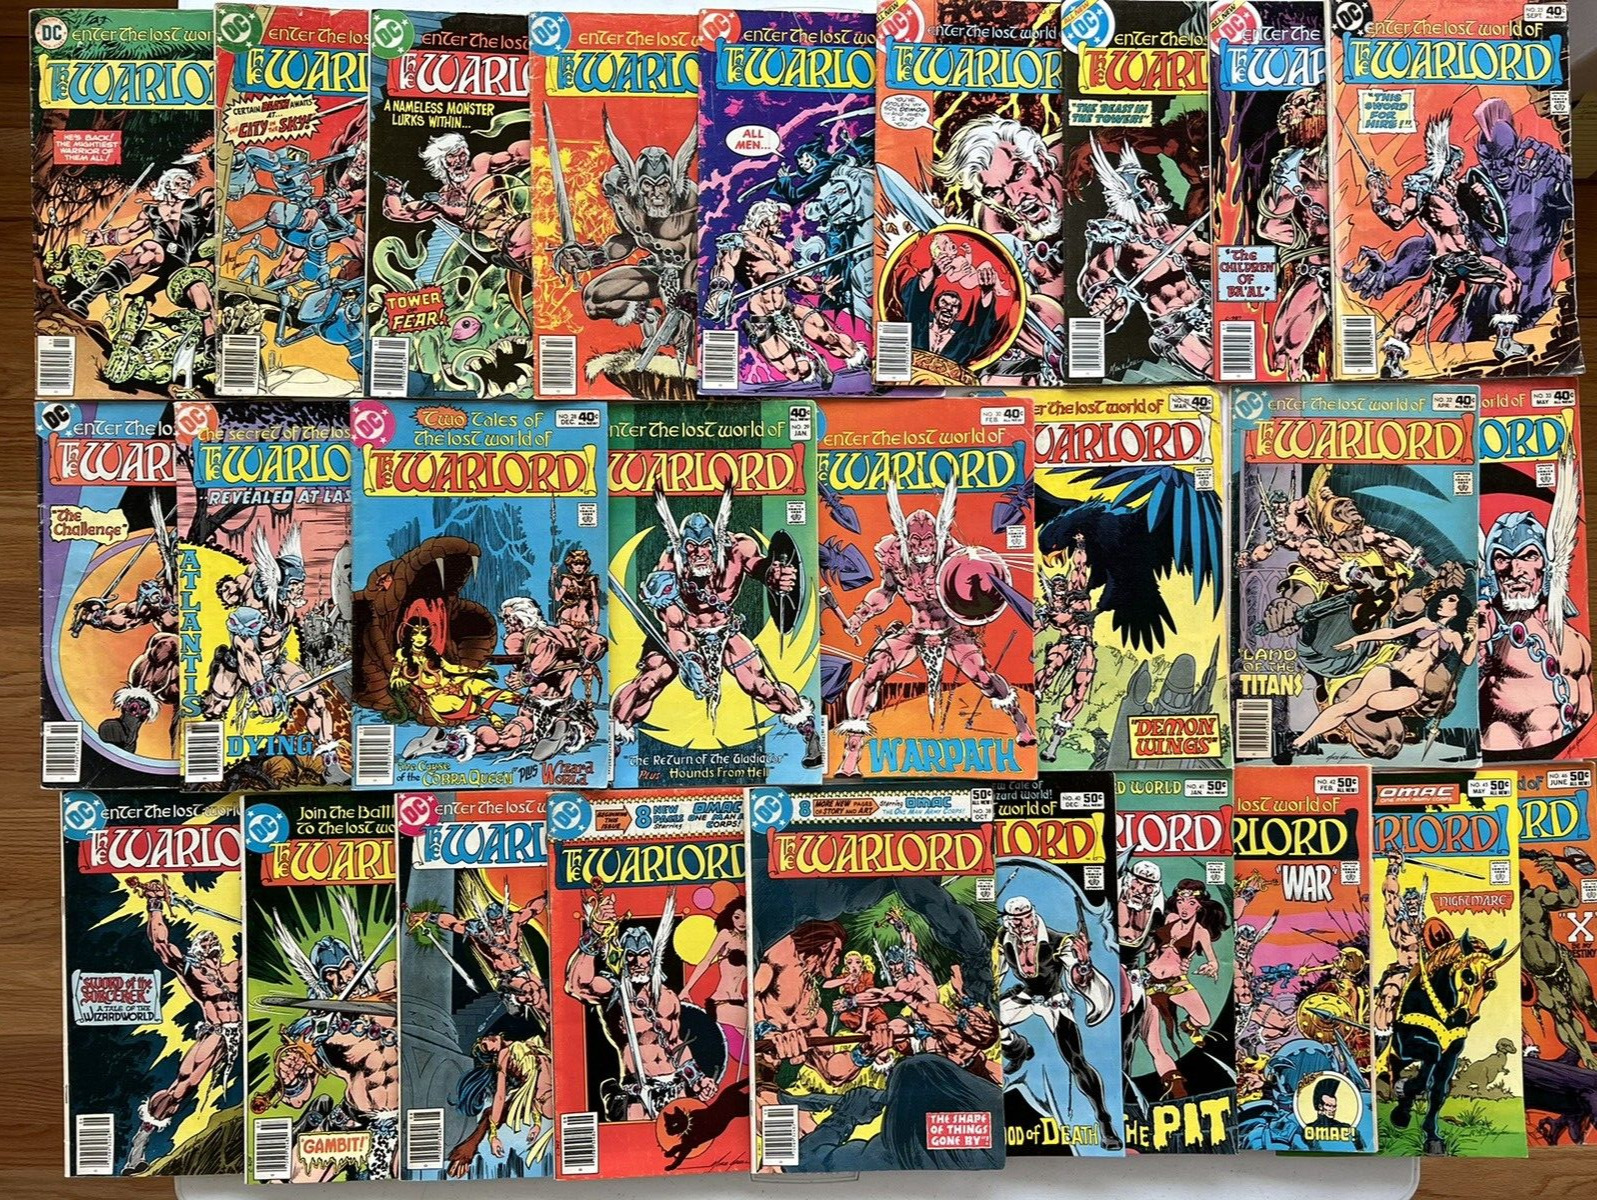 THE WARLORD Lot of 27 Iss #3-46* 4 Keys 1976-1981 - Acceptable Condition